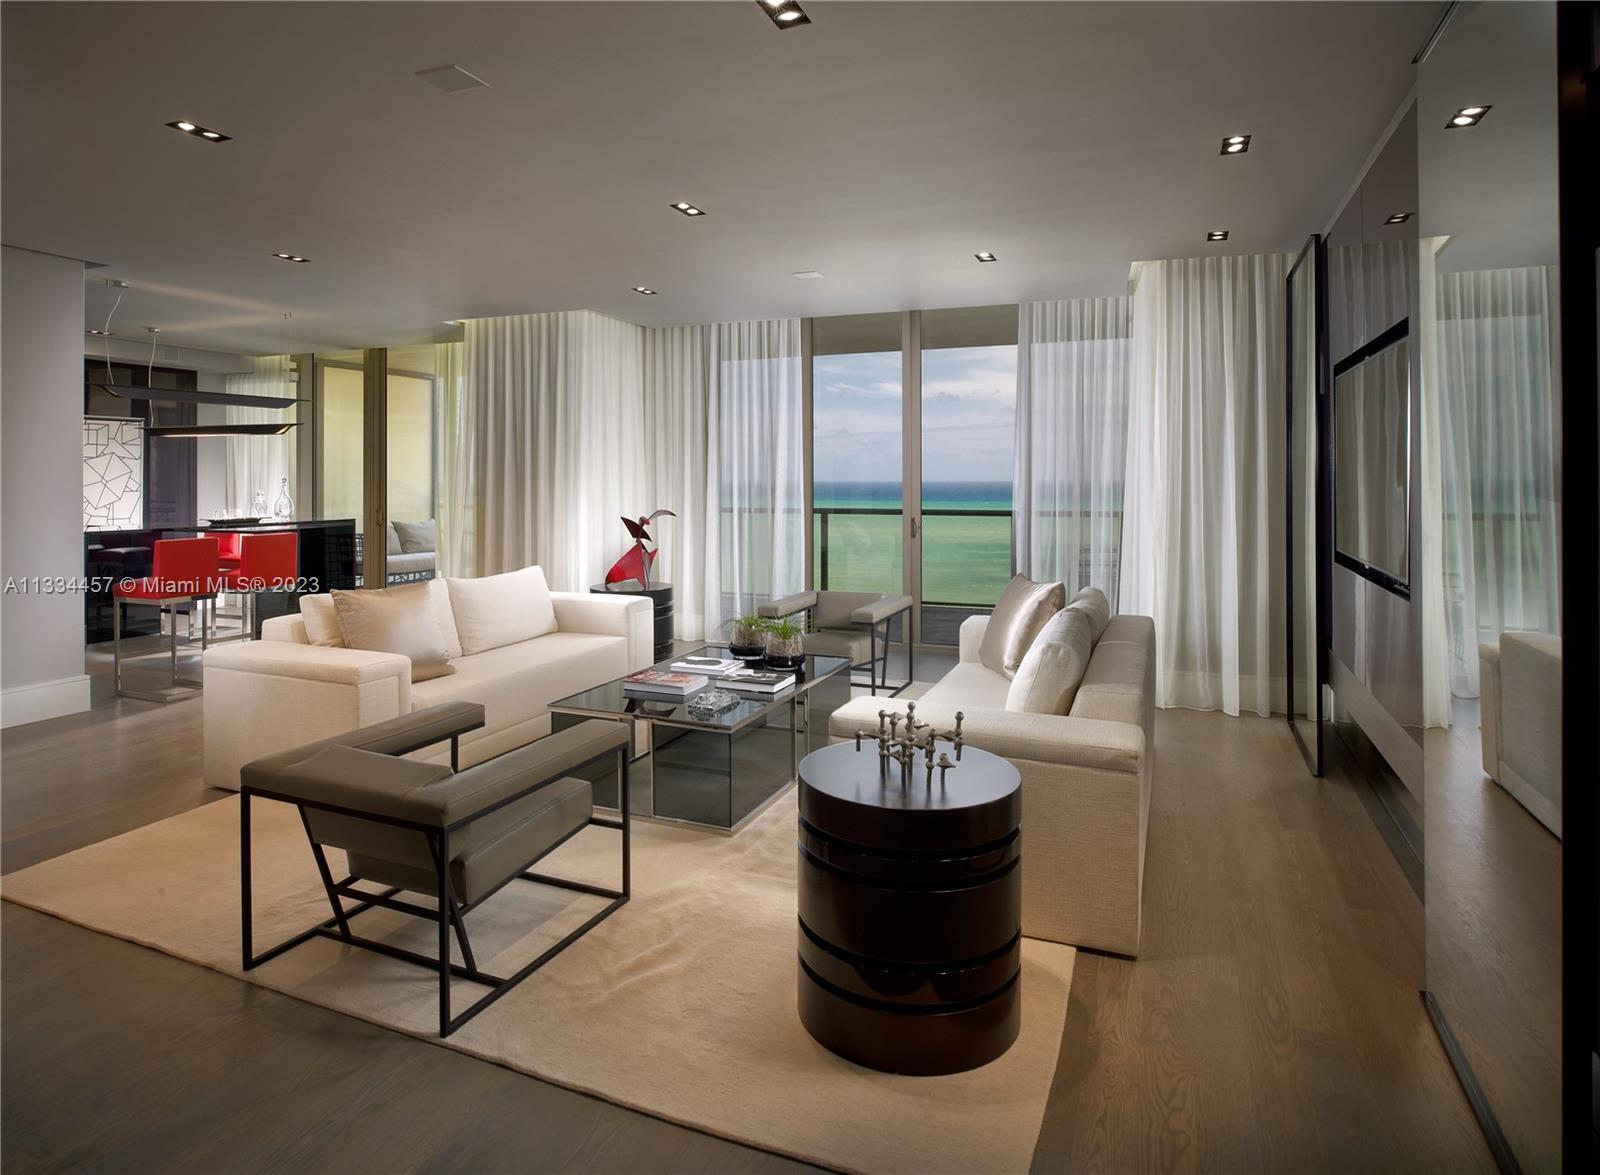 Your home in sky! Impeccable developer Chelsea model residence by B+G Design. Part of the St Regis B